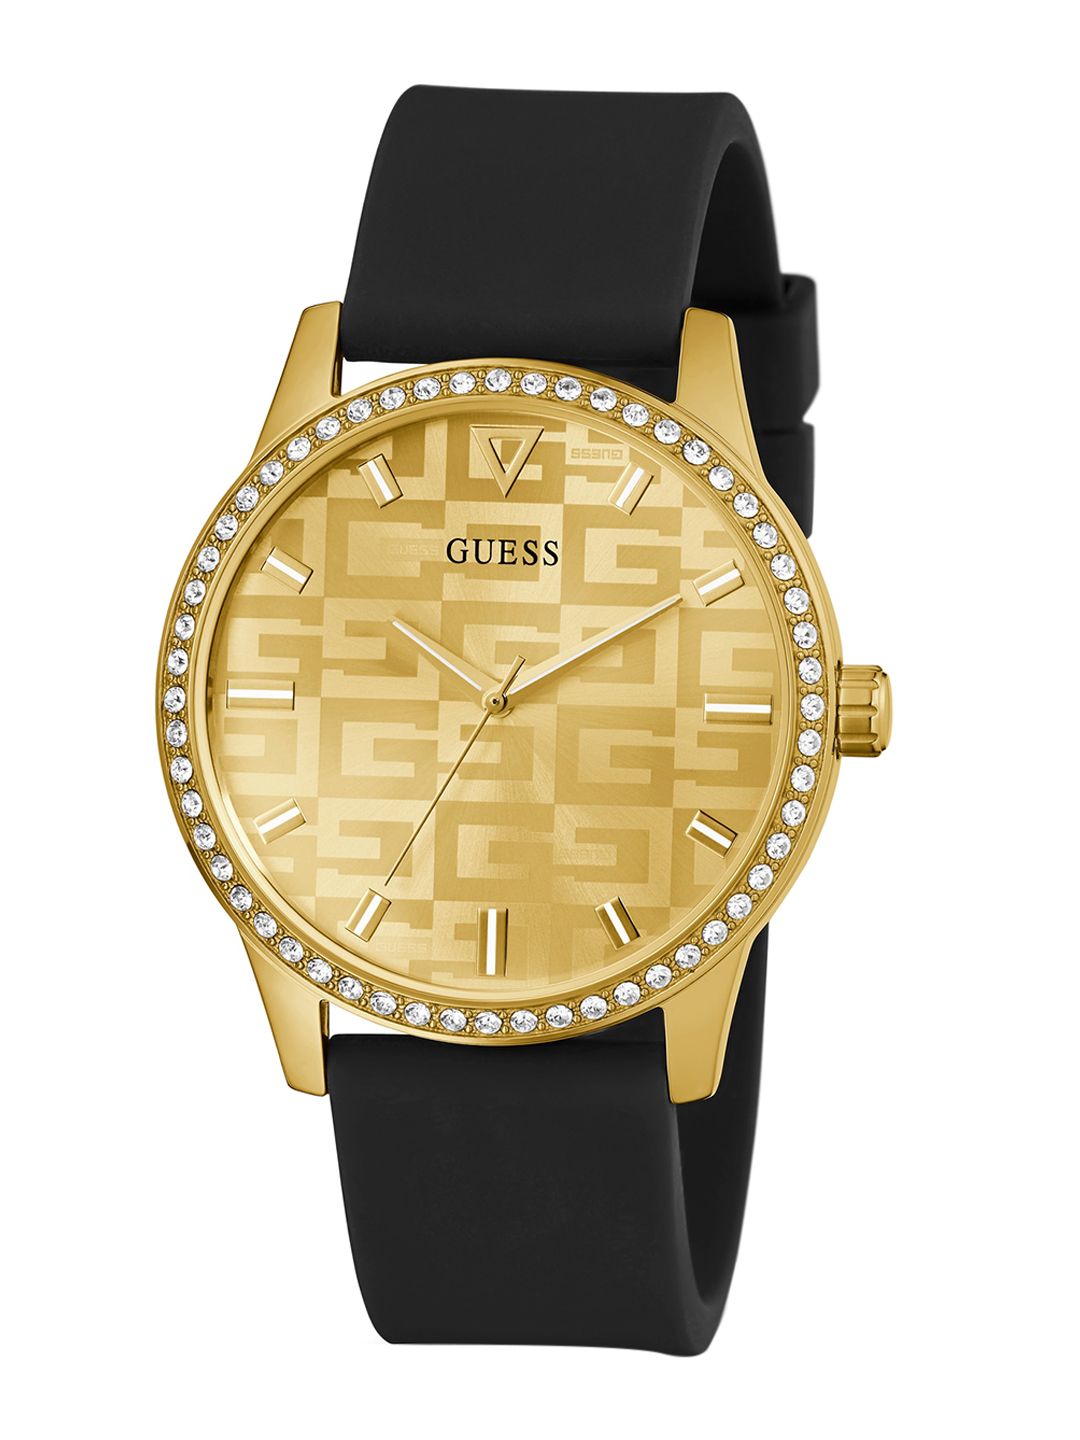 GUESS Women Copper-Toned Dial & Black Straps Analogue Watch GW0355L1 Price in India